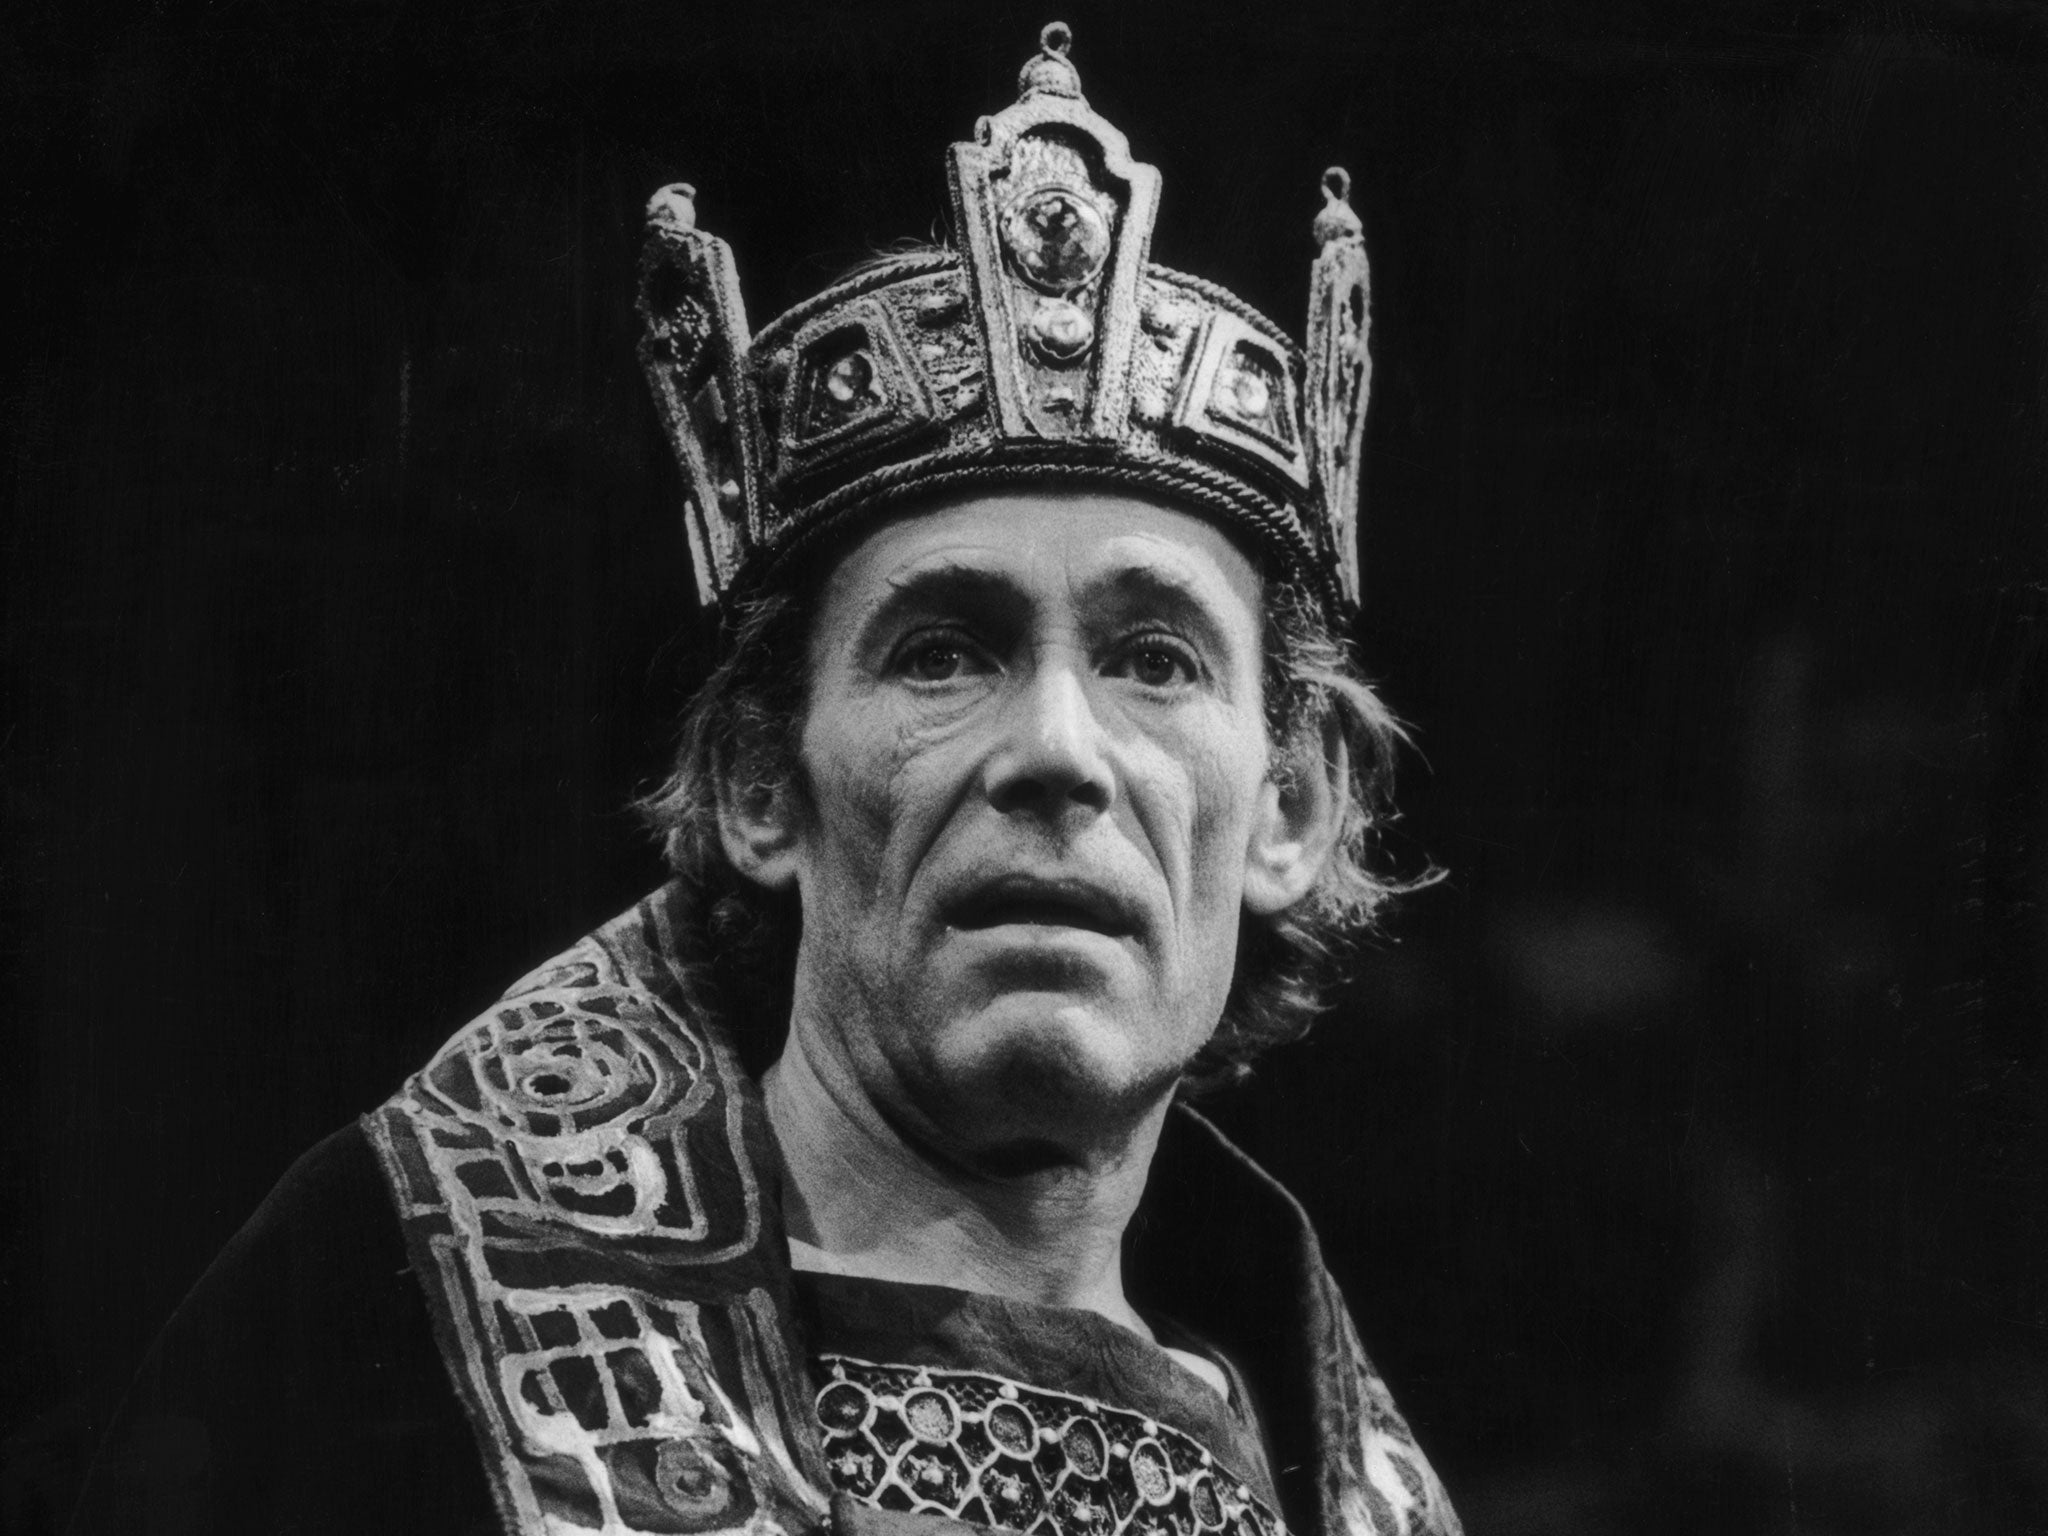 Peter O’Toole in the Old Vic version of Macbeth in 1980